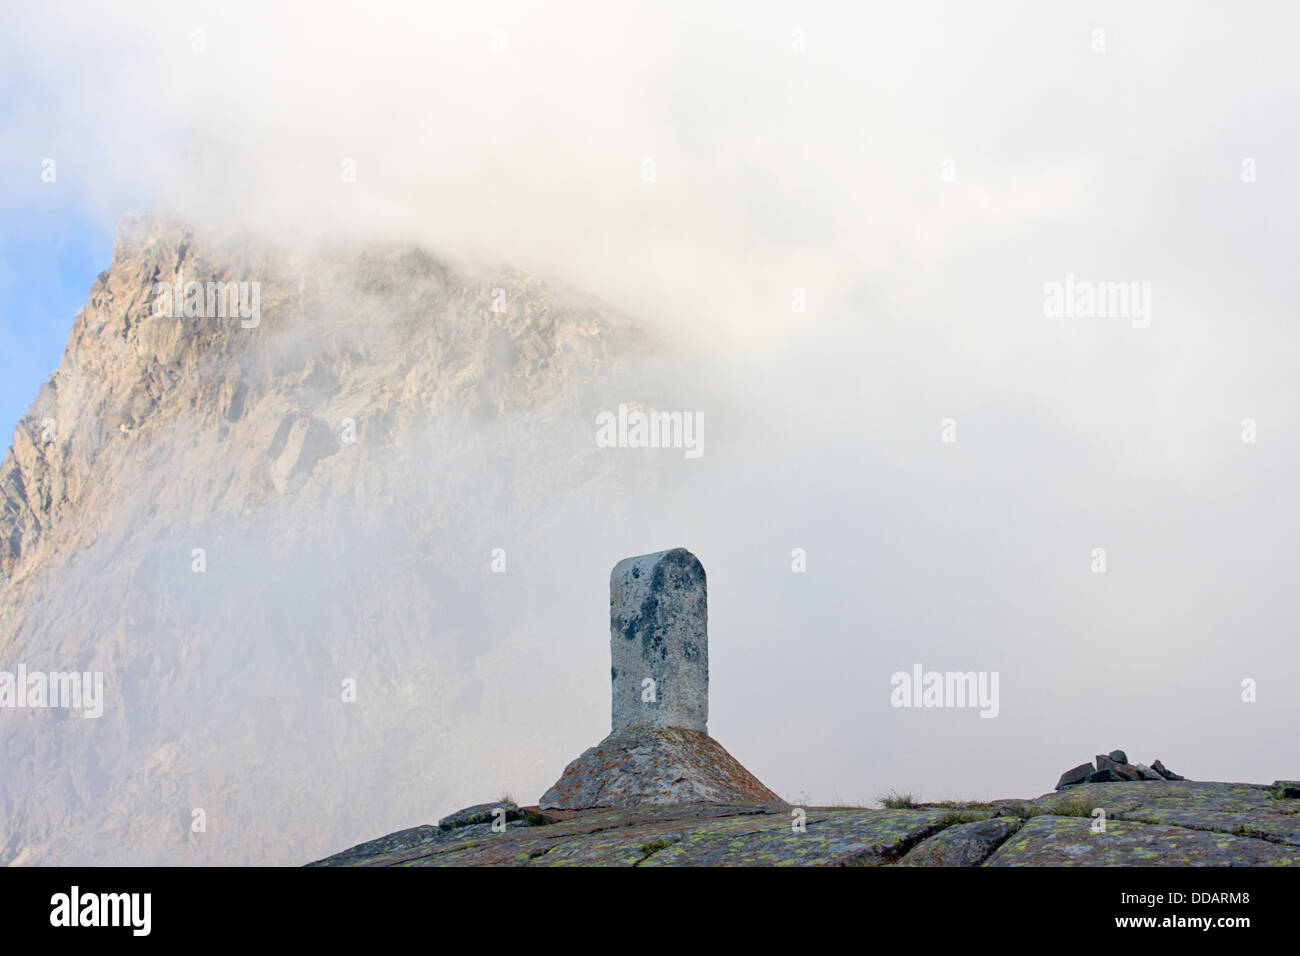 Marking of the border on a pass between Switzerland and Italy in the mountains Stock Photo